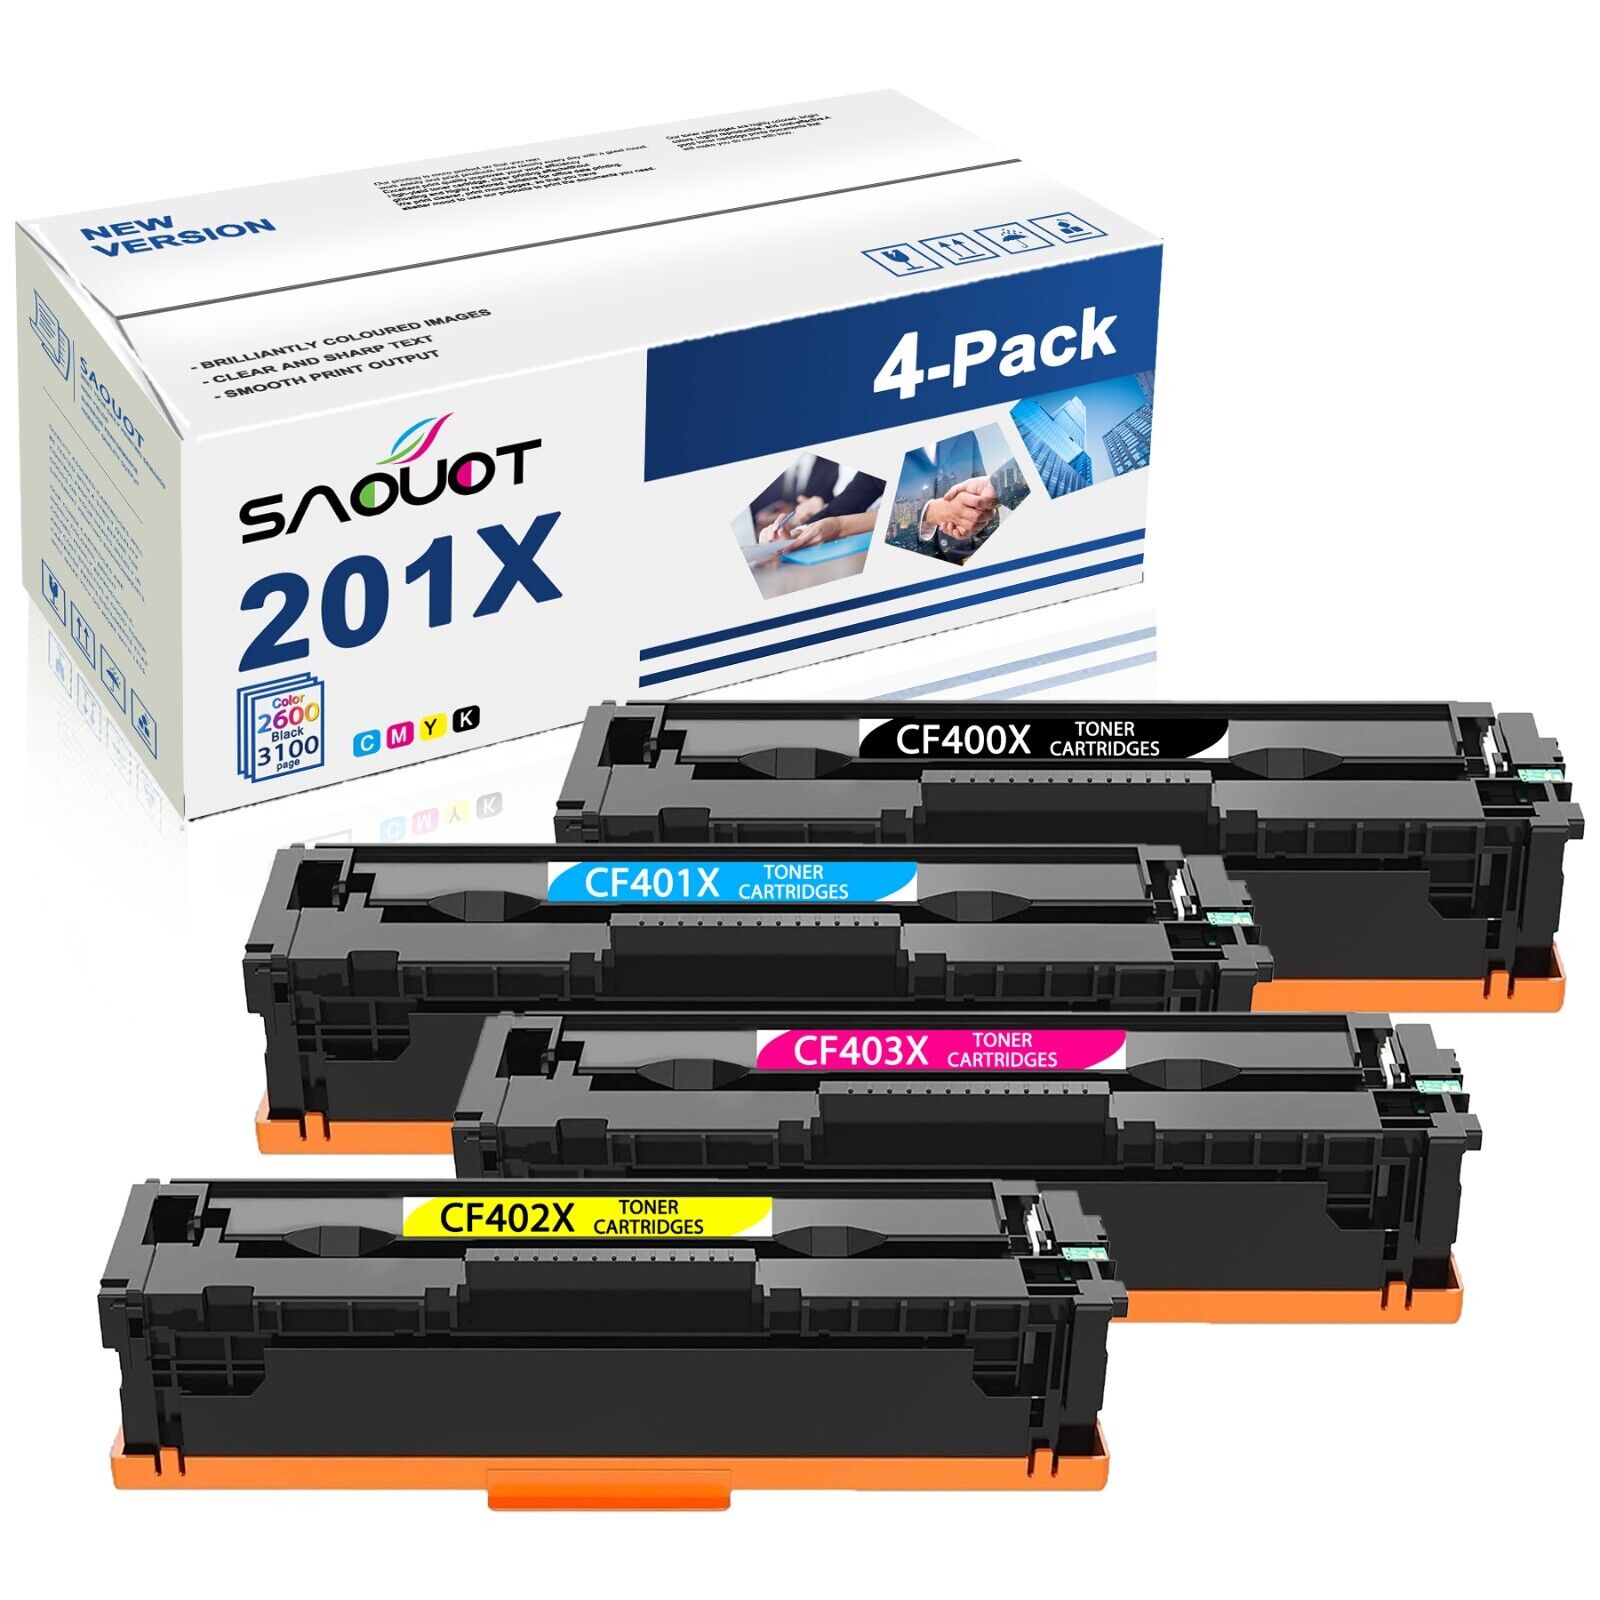 4 Pack 201X High Yield Toner Replacement for HP CF400X MFP M277c6, 1K/1C/1M/1Y